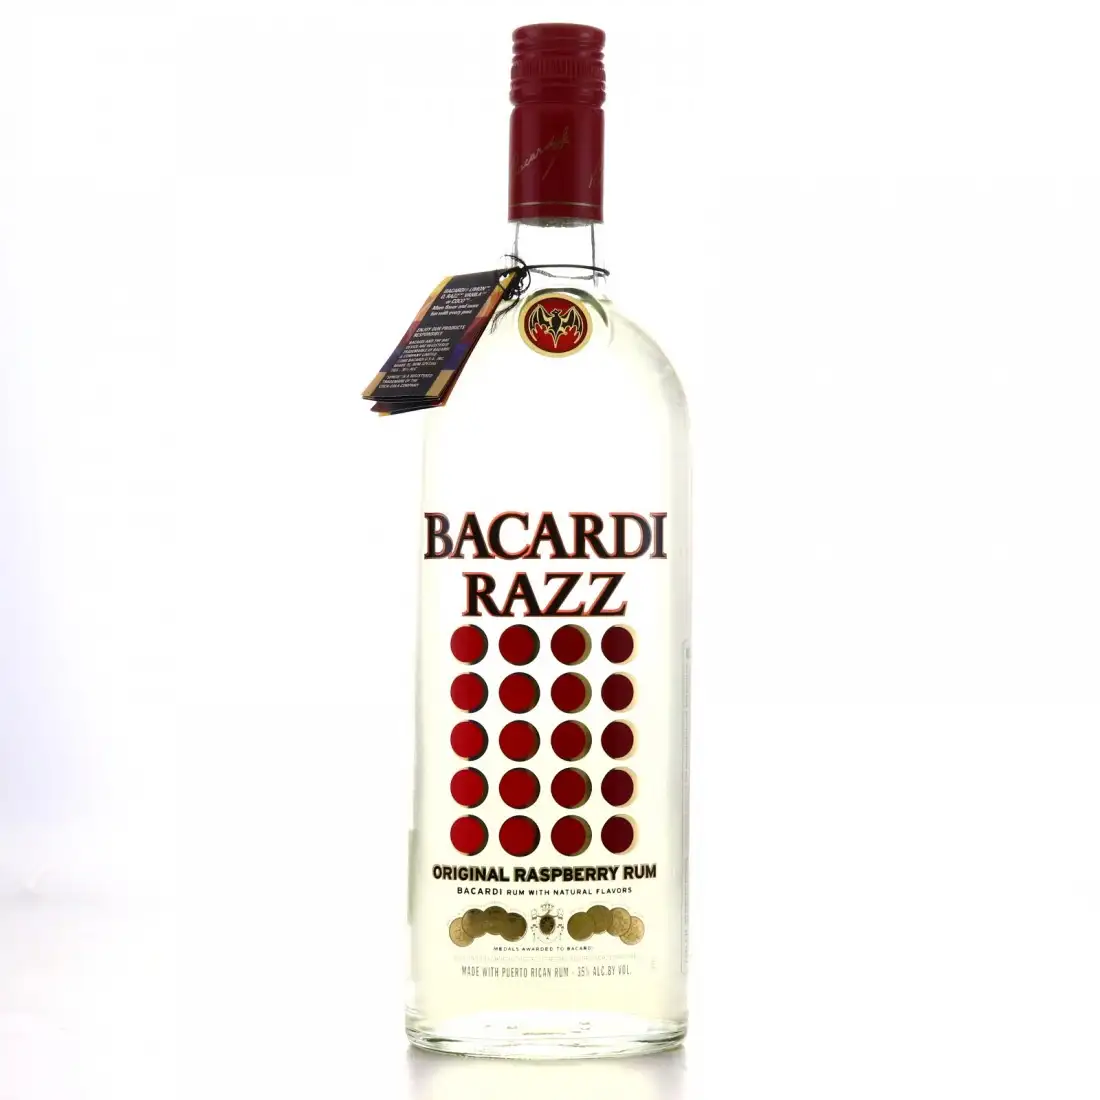 Image of the front of the bottle of the rum Bacardi Razz